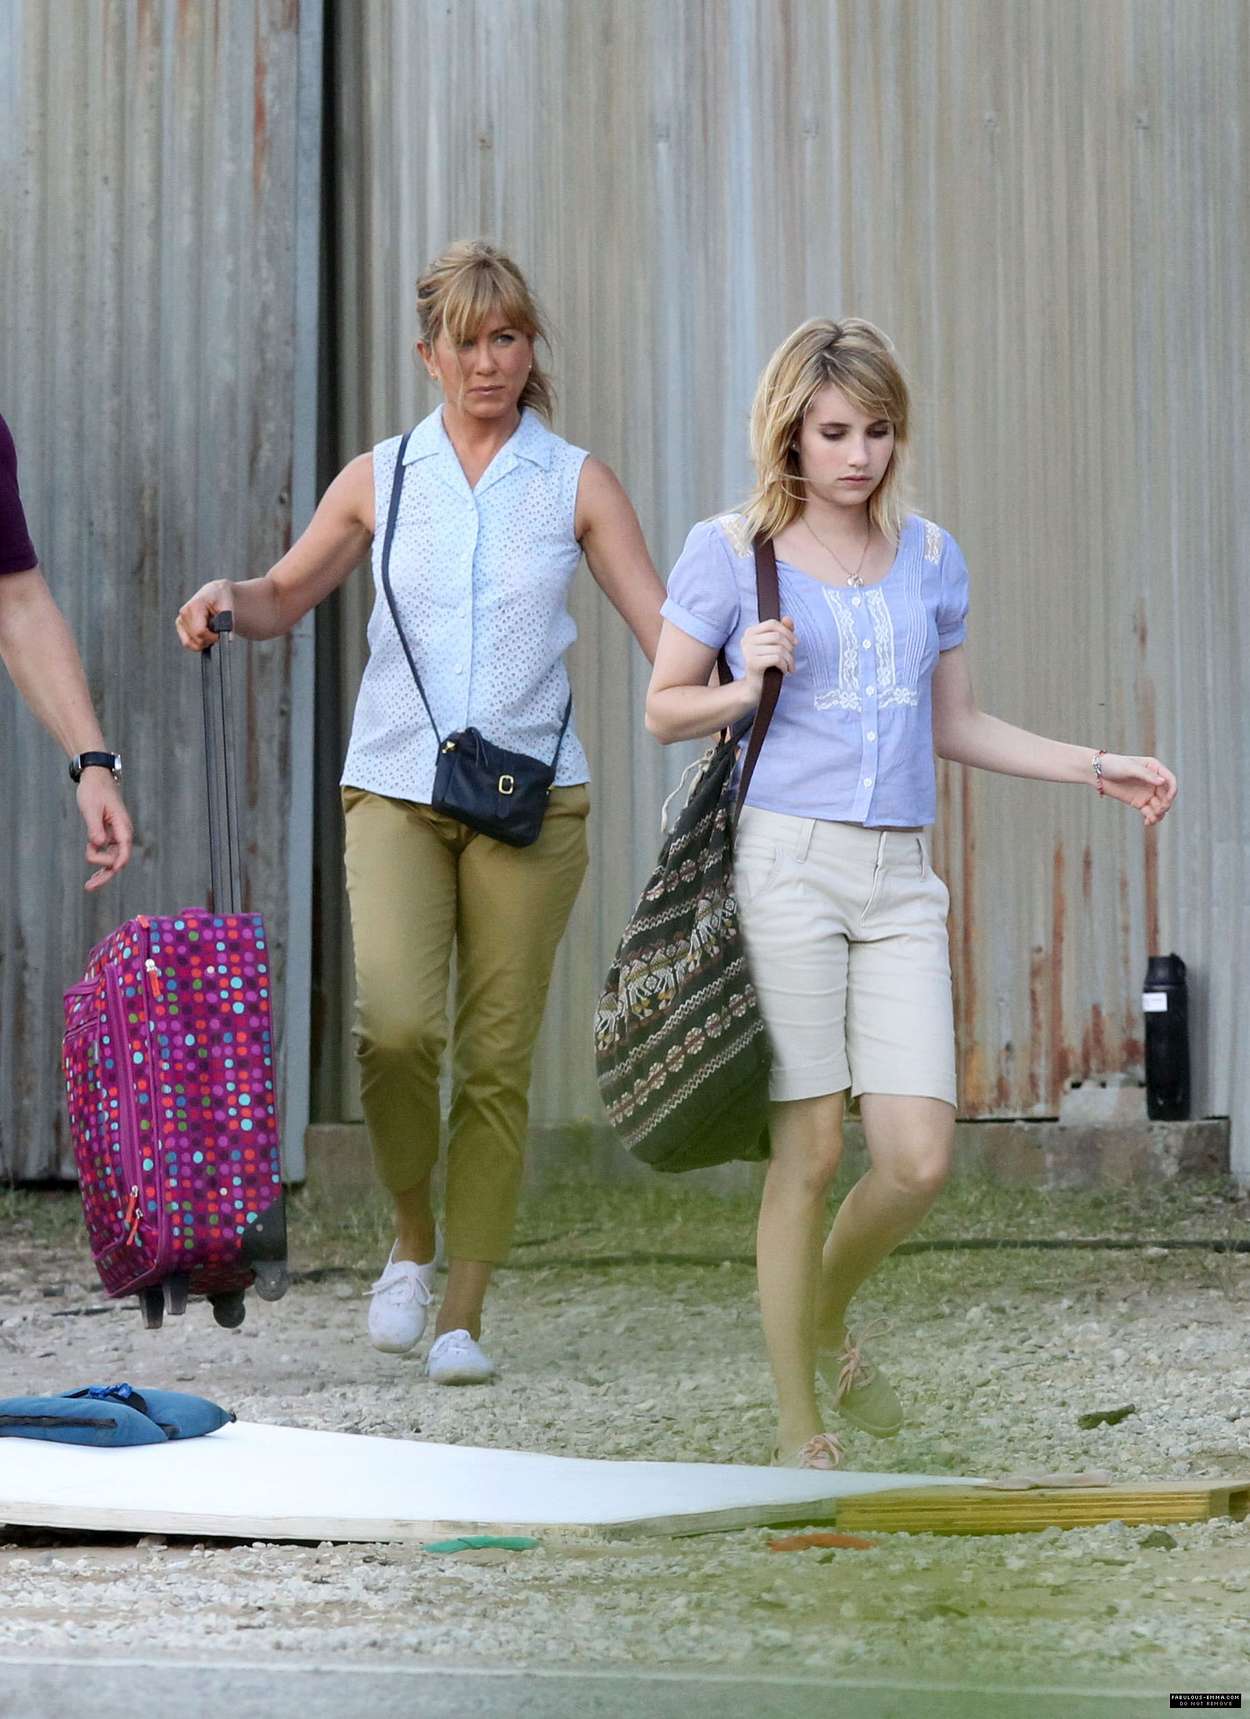 Jennifer Aniston and Emma Roberts - On the set of "We're the Millers" in Wilmington